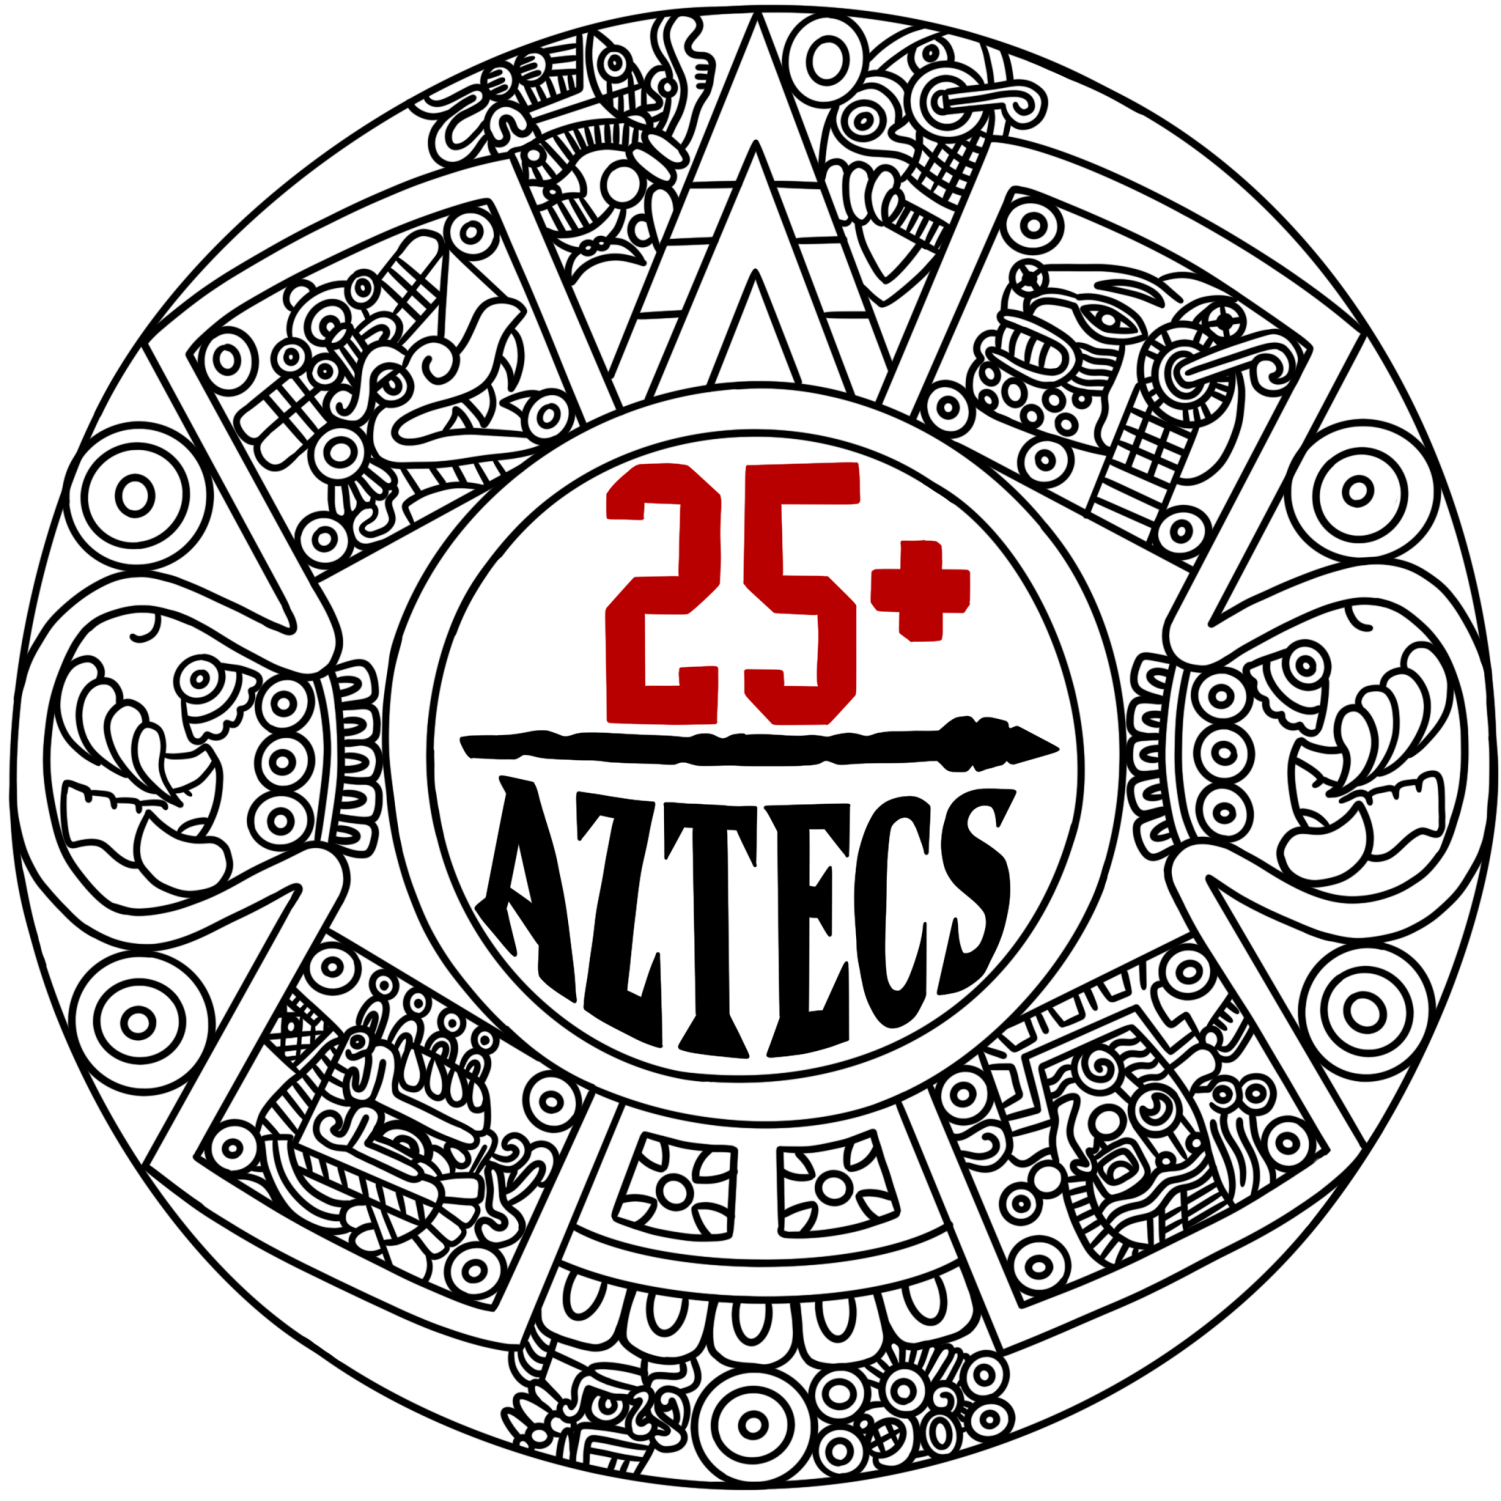 The 25+ Aztecs: Connecting non-traditional students on campus – The ...